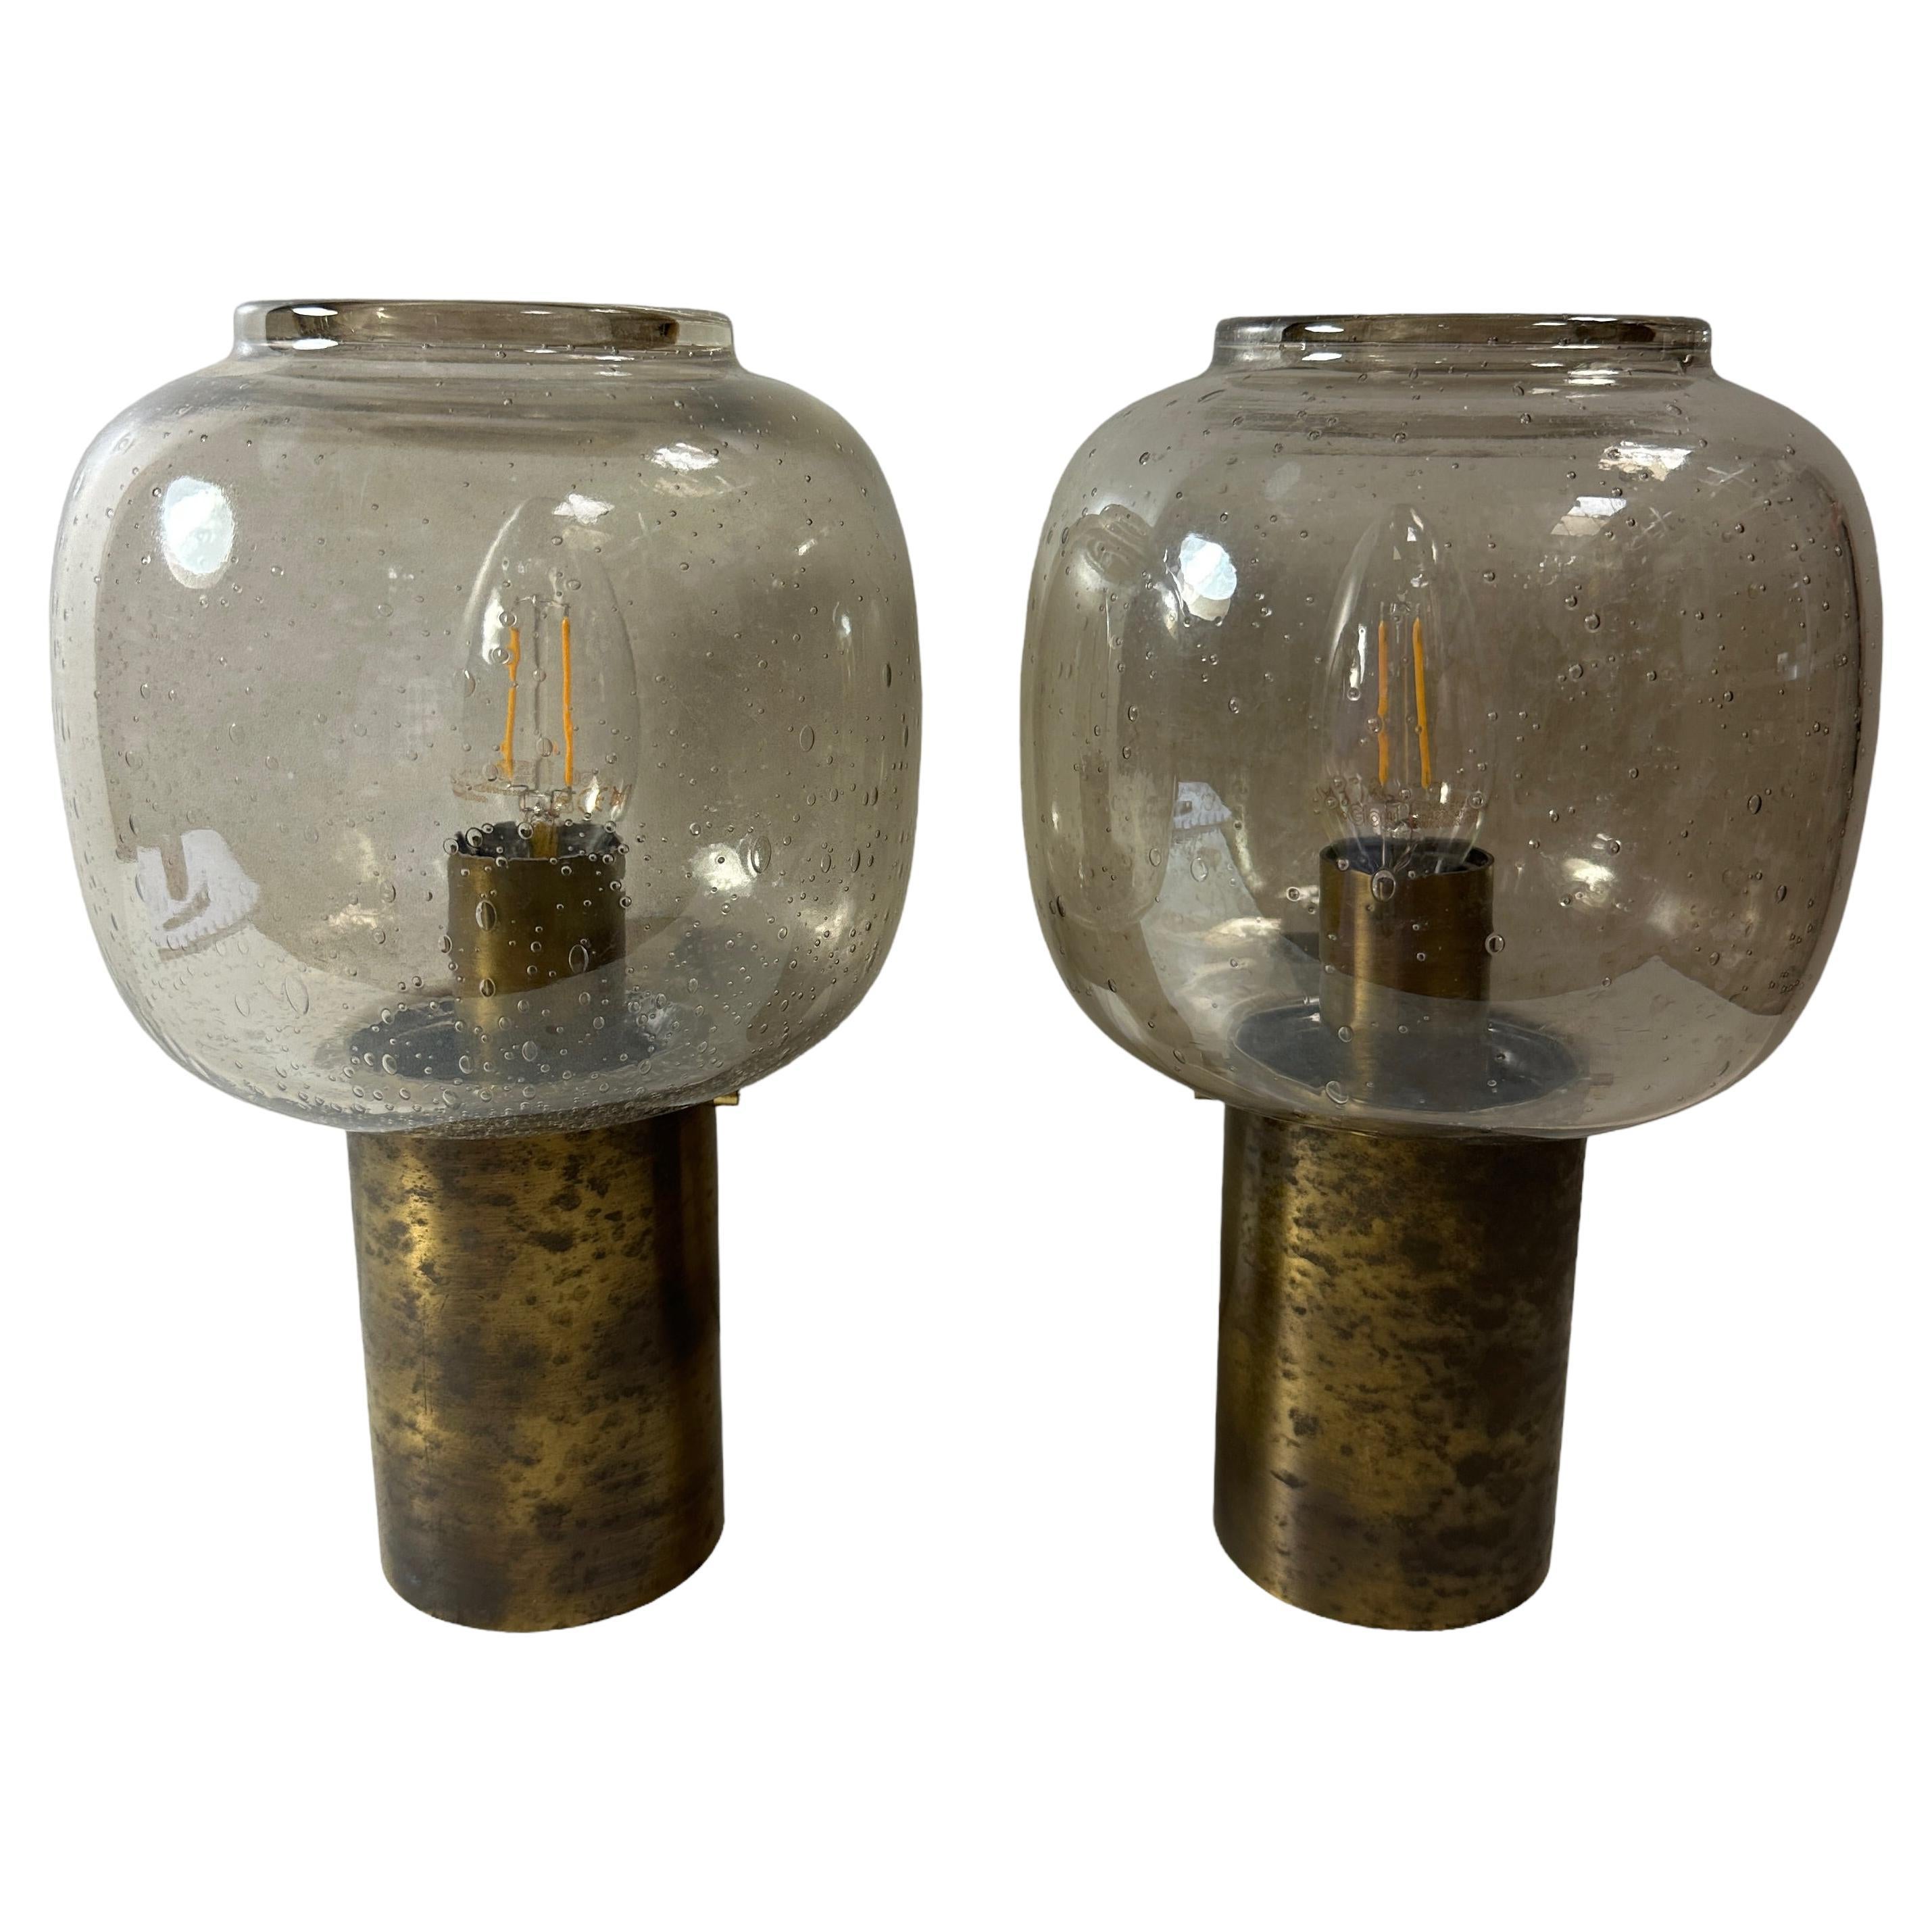 Pair of 1960s Wall Sconces in the Style of Hans - Agne Jakobsson, Skandinavia